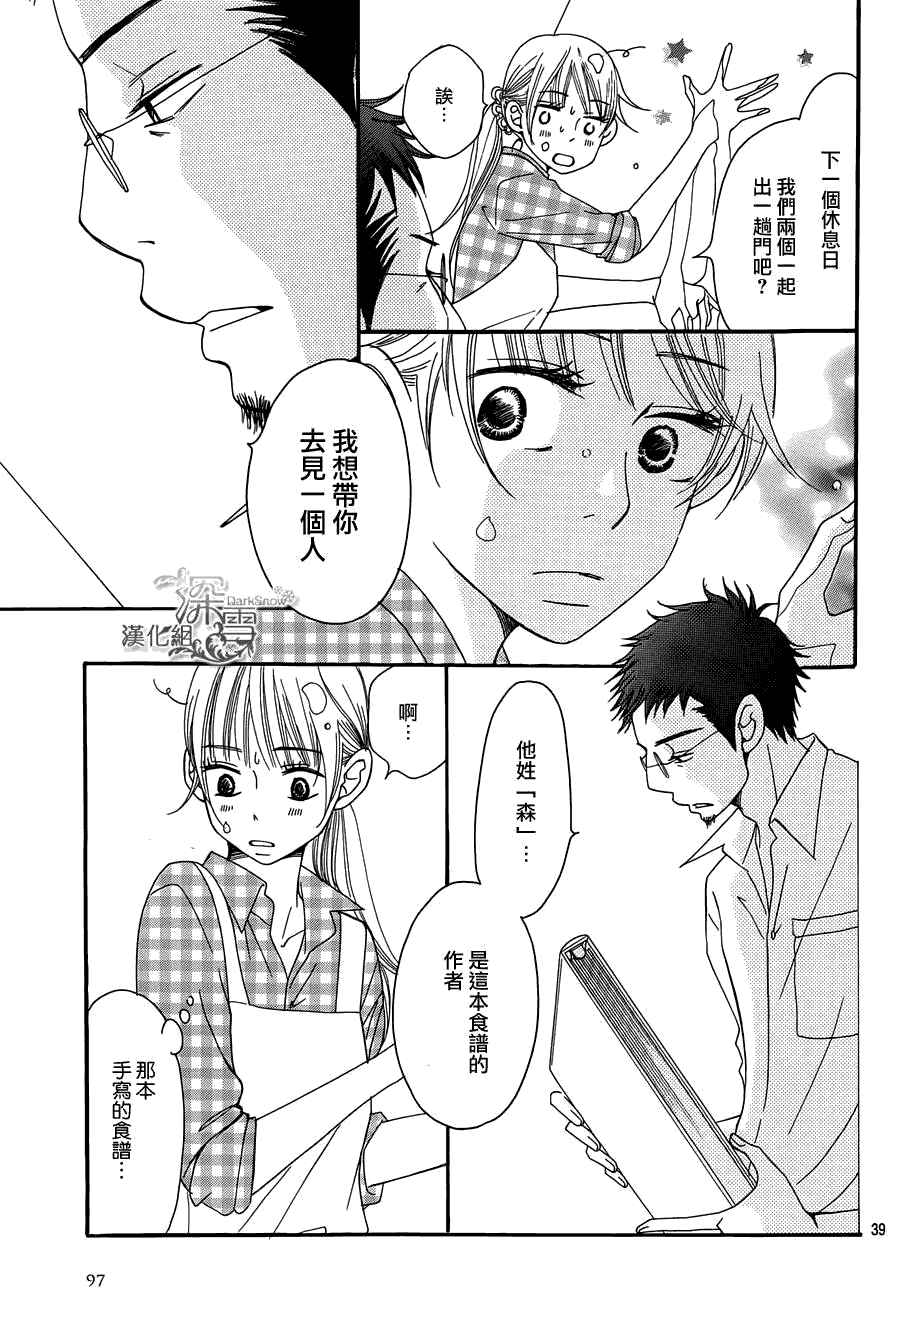 Bread&Butter - 第3話 - 3